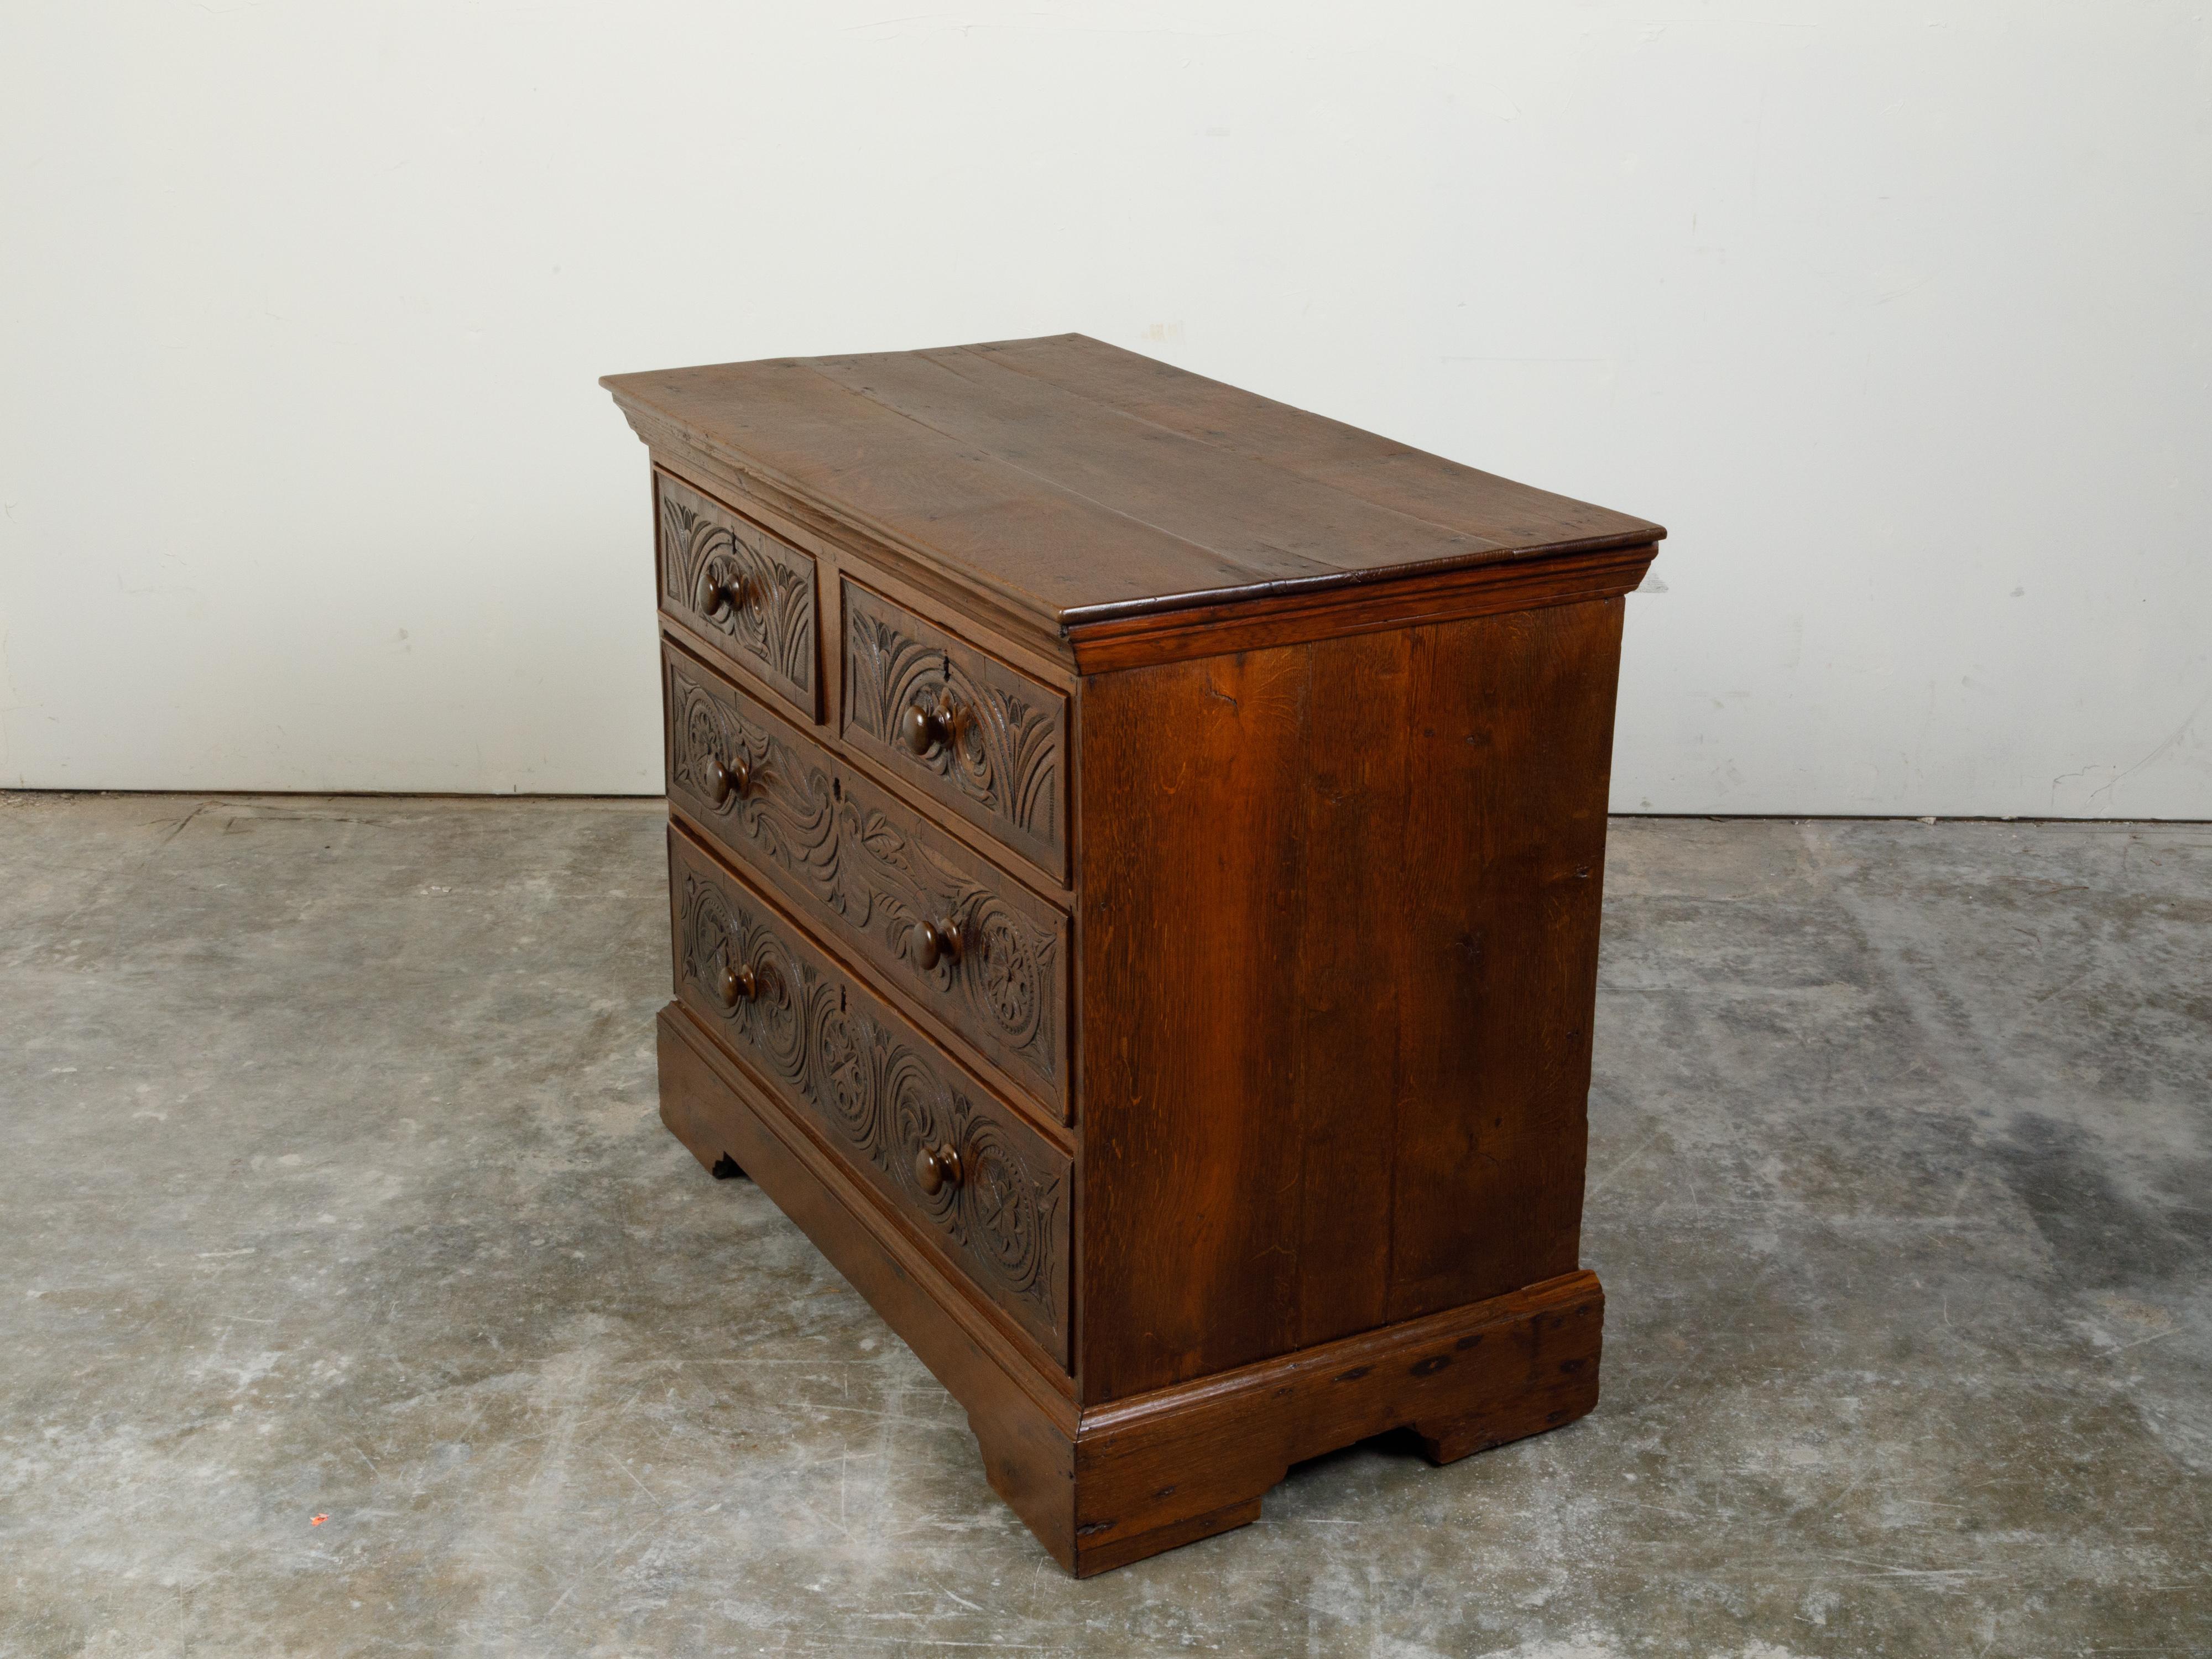 English Georgian Period 1800s Oak Chest with Four Drawers and Carved Motifs For Sale 4